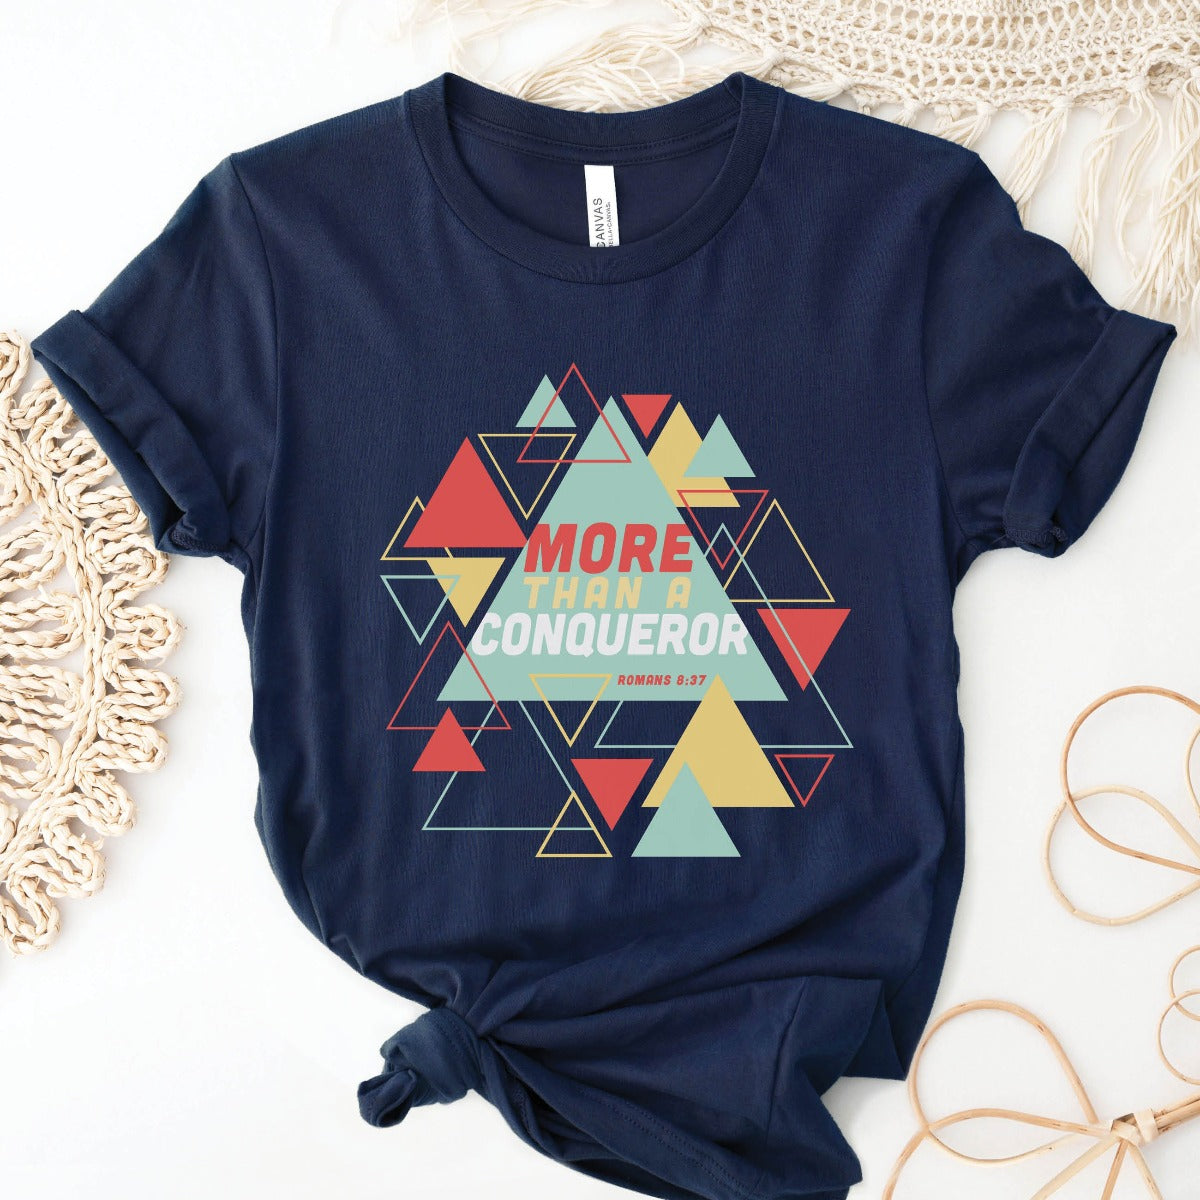 Navy blue "More Than A Conqueror" Romans 8:37 bible verse scripture unisex faith-based Christian Bella Canvas 3001 t-shirt, with bright and colorful geometric triangles pattern, made in the USA for Men and Women Jesus believers